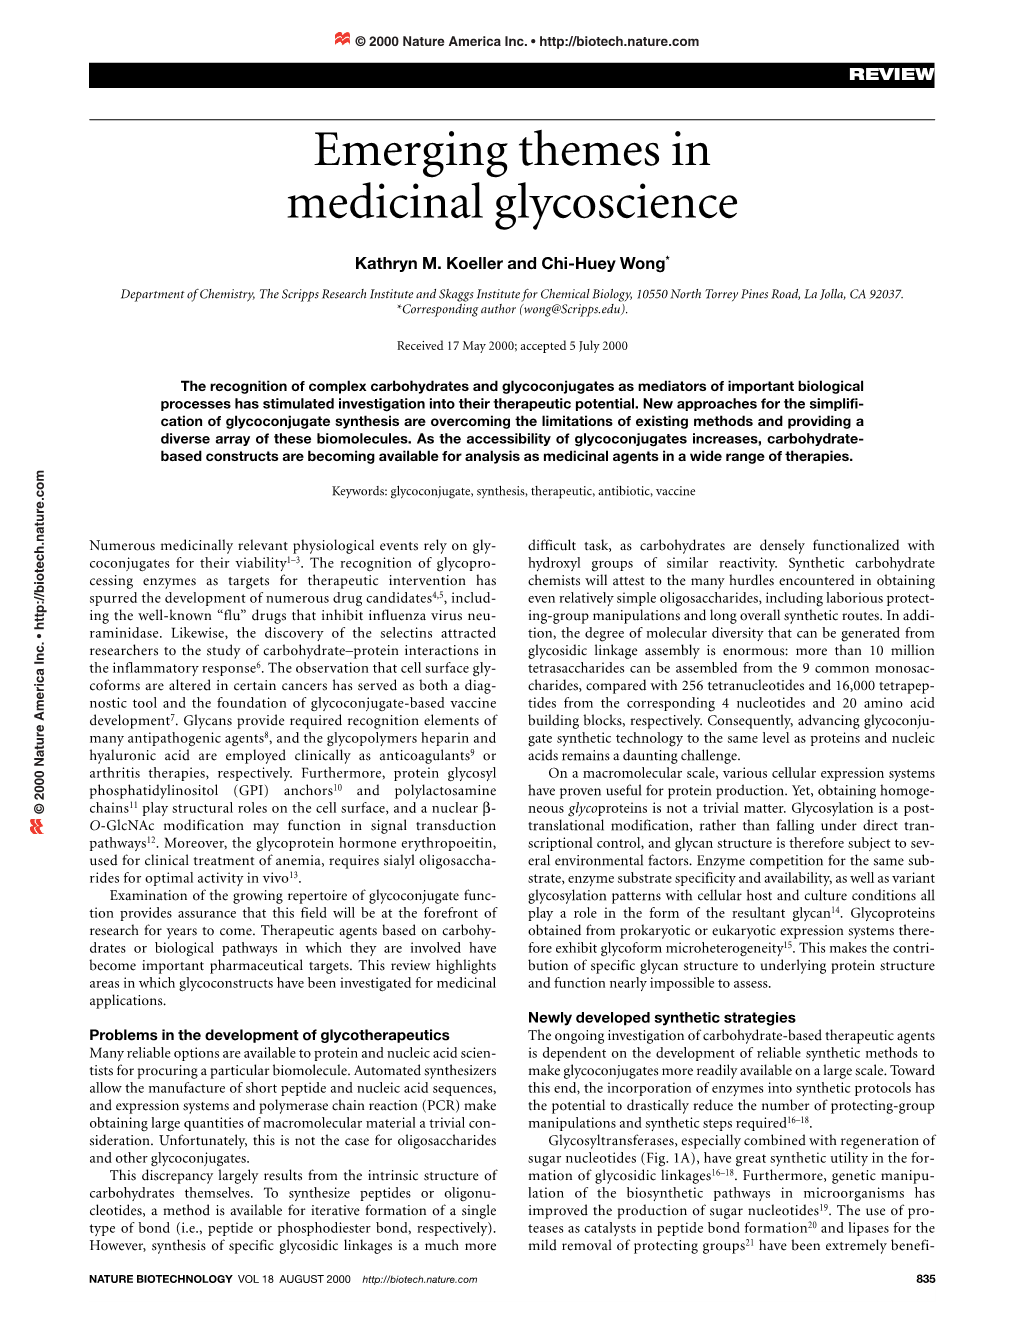 Emerging Themes in Medicinal Glycoscience